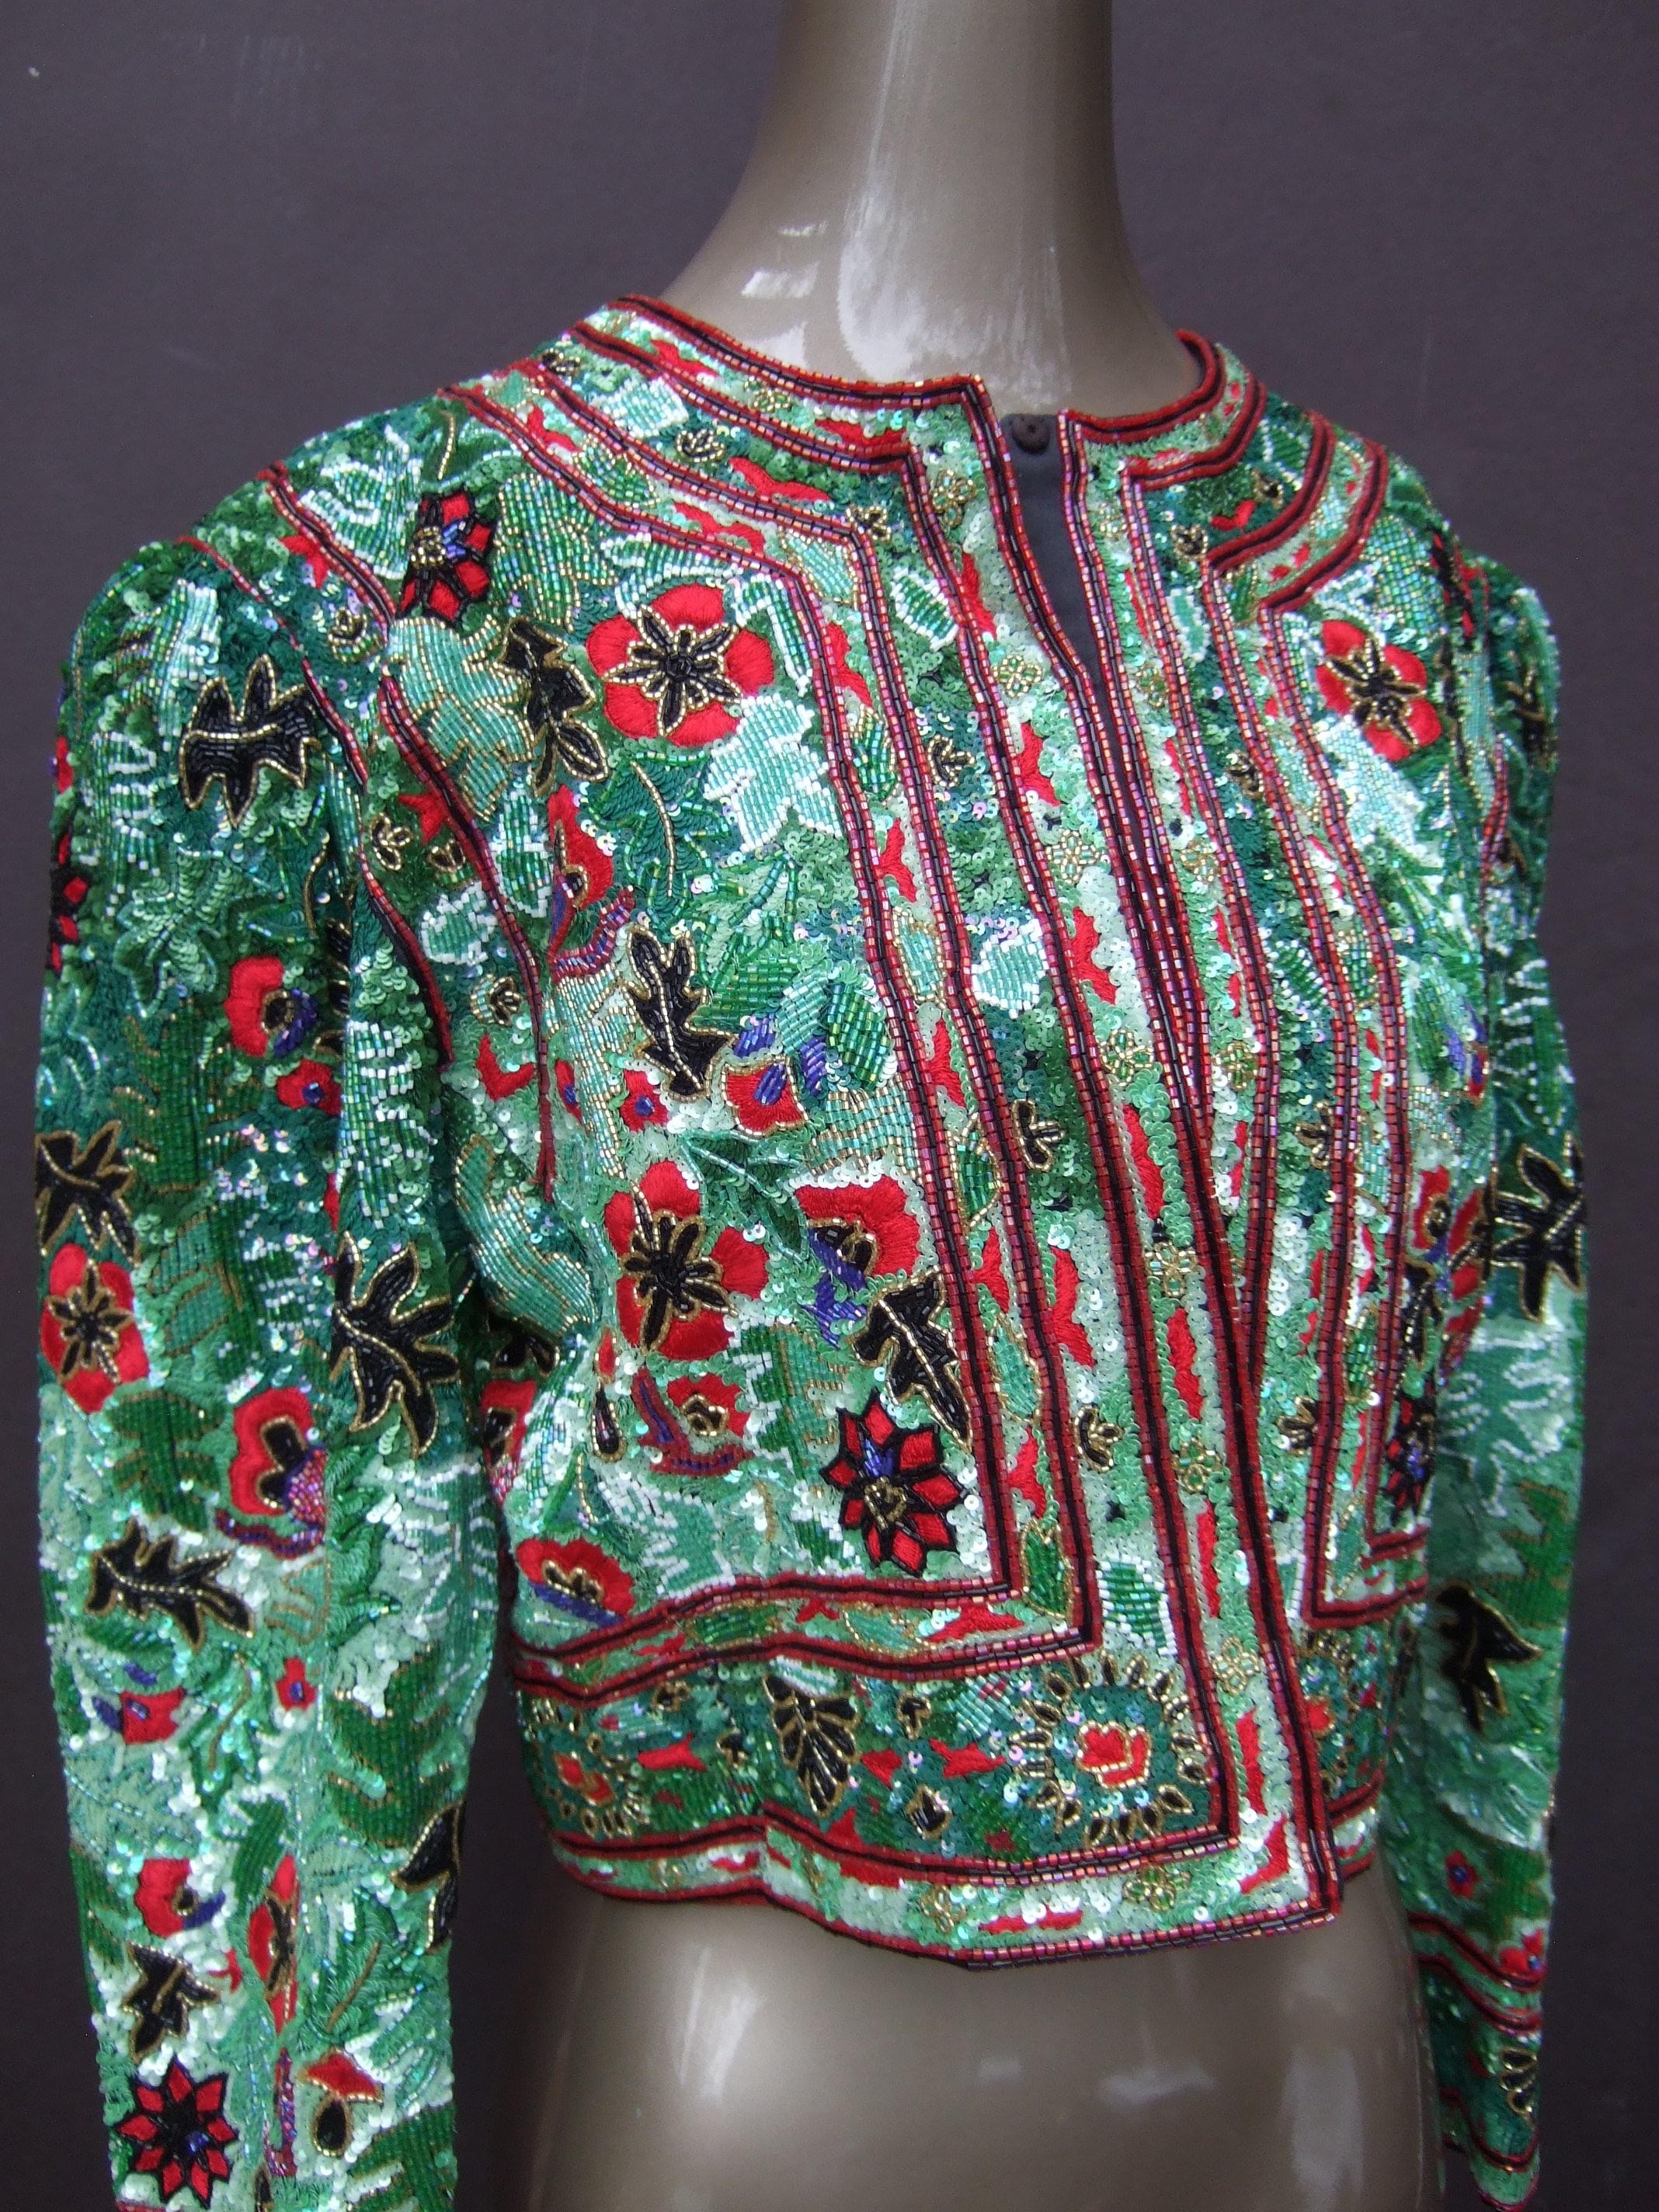 Exquisite Elaborate Glass Floral Beaded Embroidered Bolero Jacket c 1980s For Sale 15